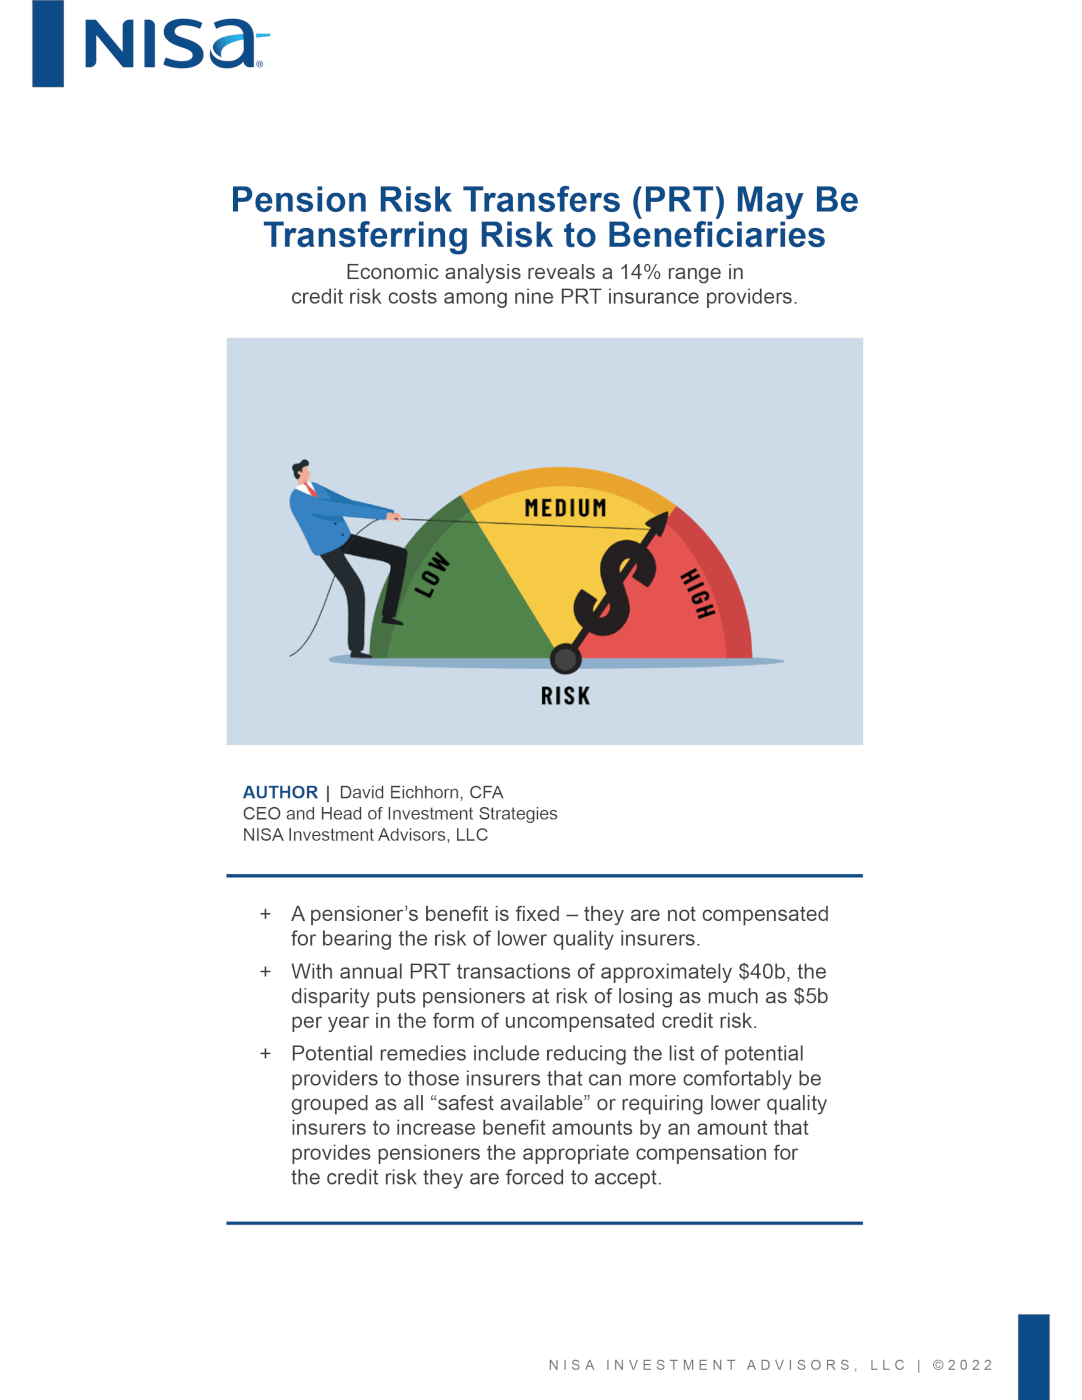 Pension Risk Transfers May Be Transferring Risk to Beneficiaries